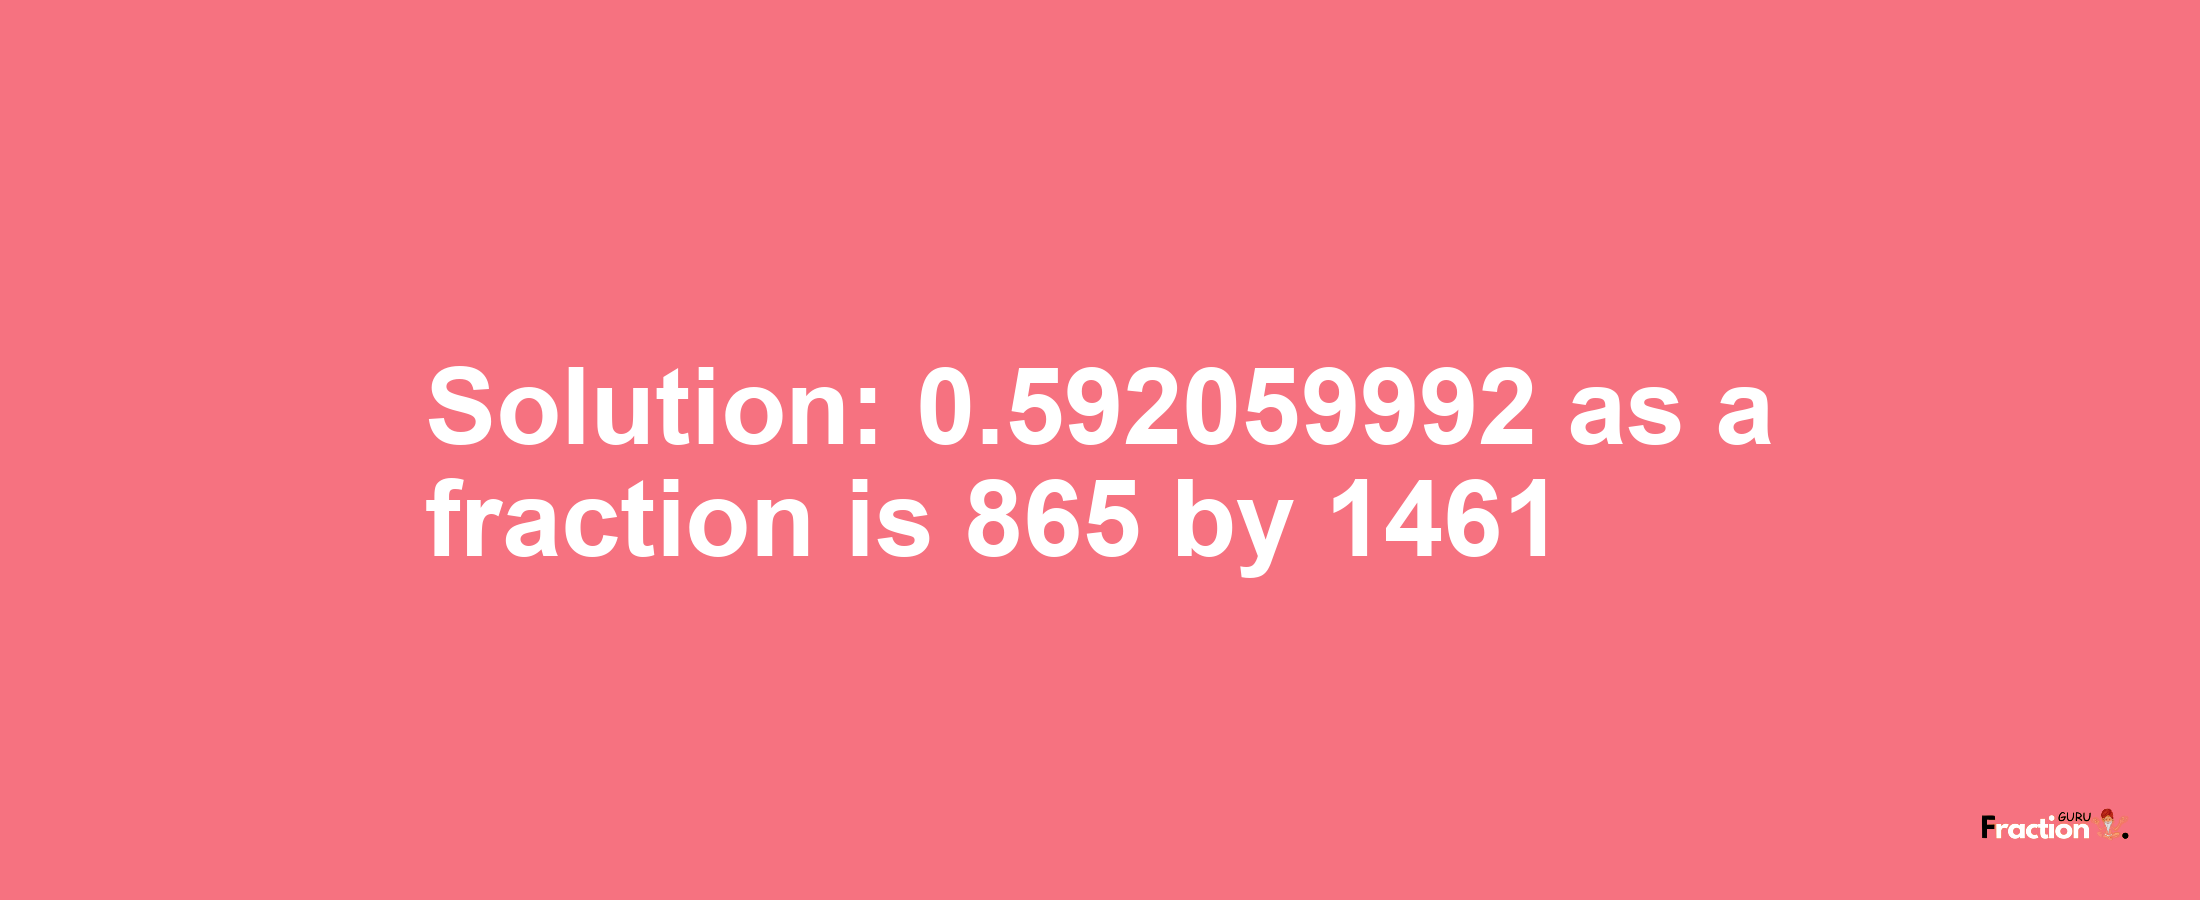 Solution:0.592059992 as a fraction is 865/1461